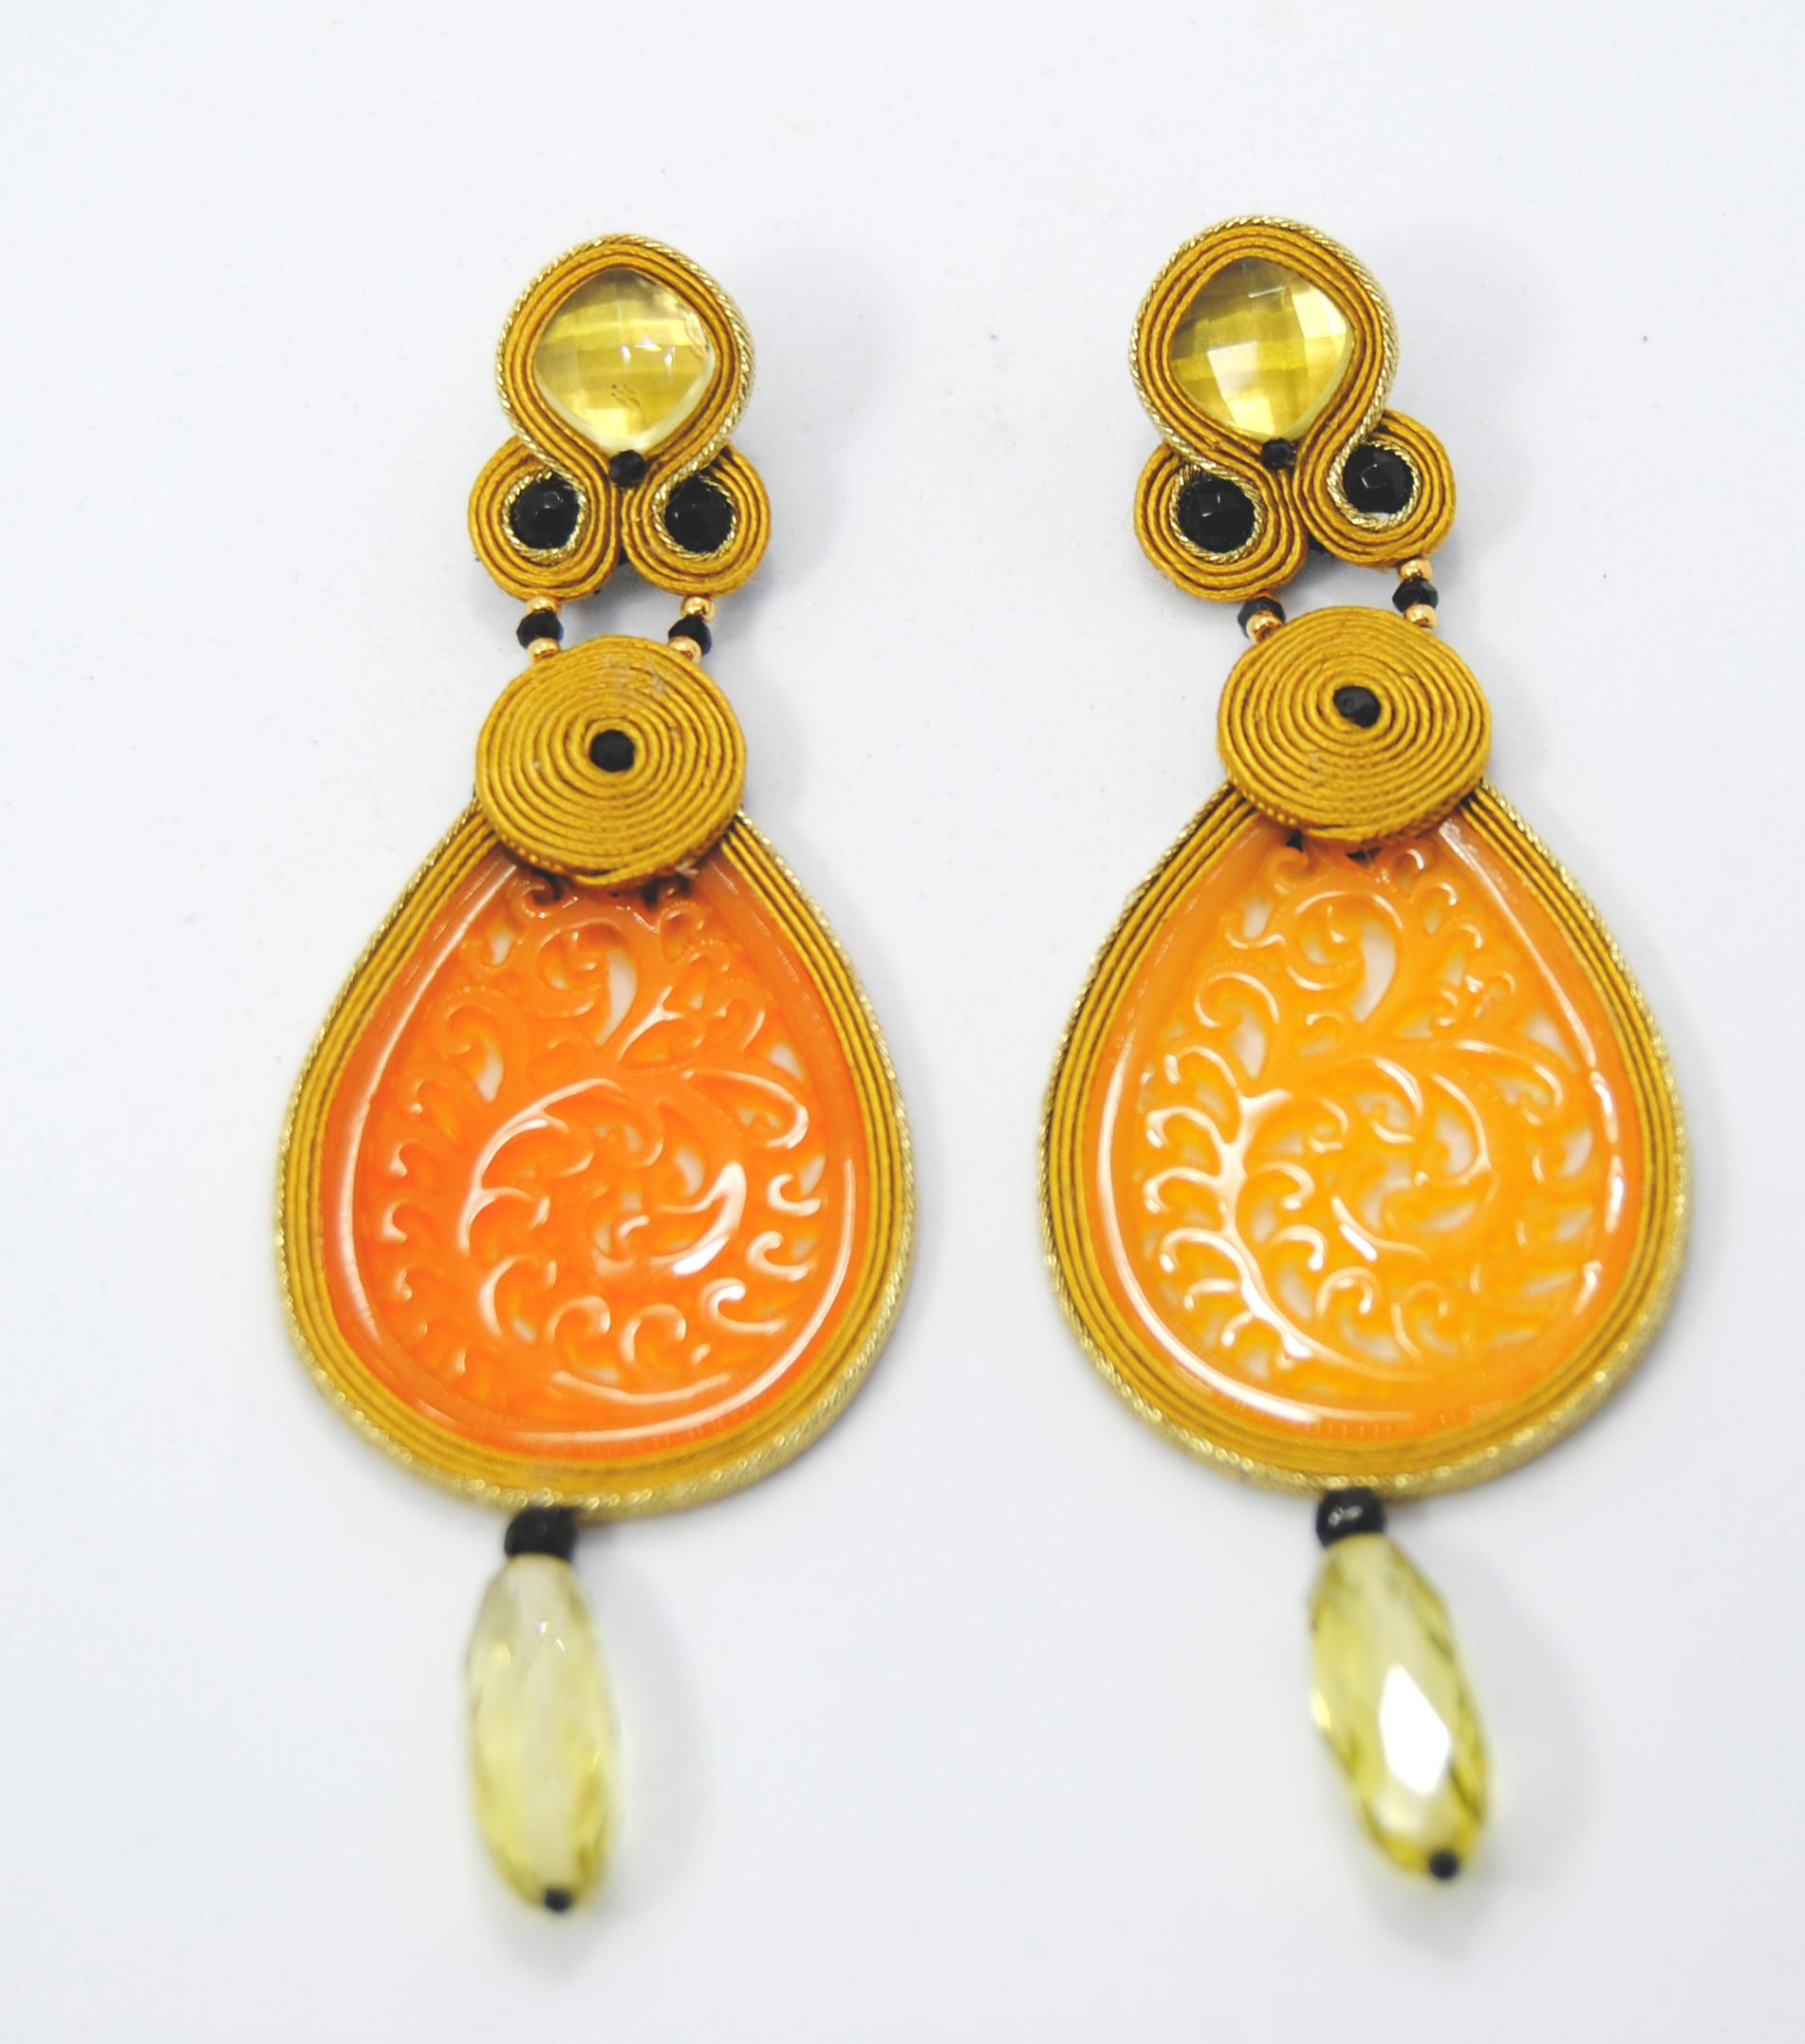 Soutache Technique earrings a Joint venture of Joyería Pradera and Musula Jewels where they create Colourful, Lively and Light Travel Jewelry that has an Iconic touch and give a modern and stylish look.
Head and chandelier are  of carved orange